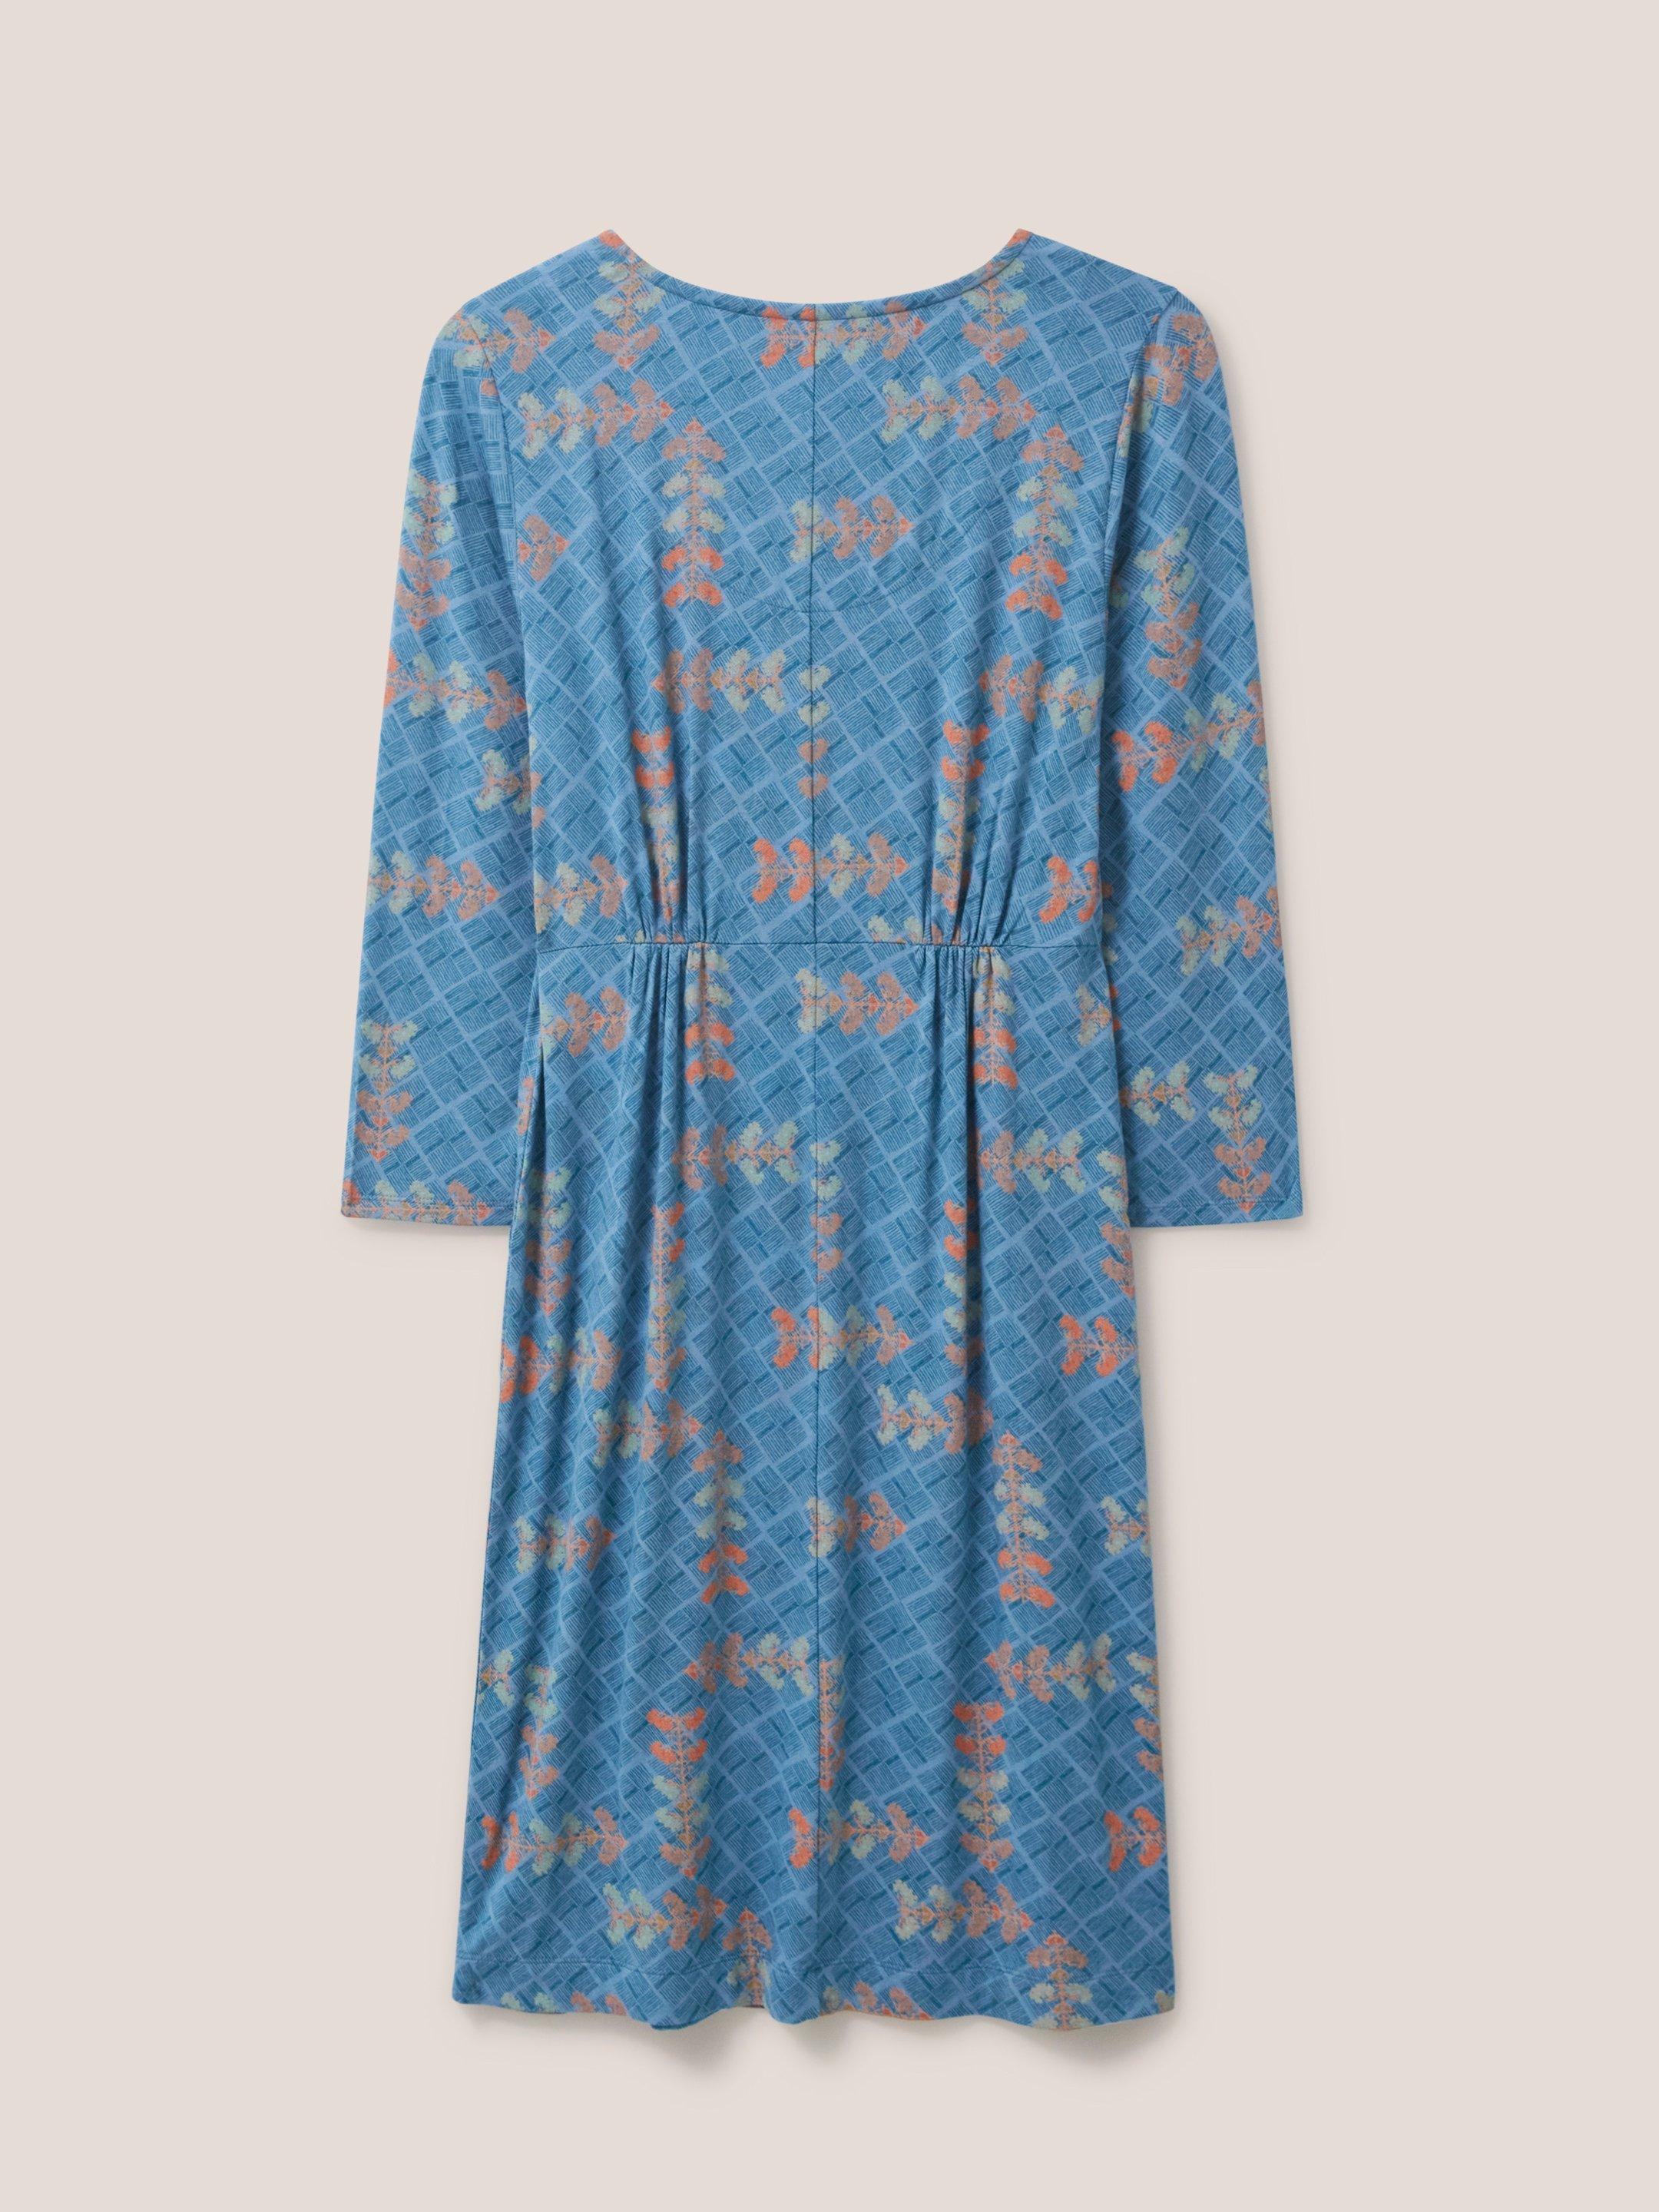 Tallie Eco Vero Jersey Dress in TEAL MLT - FLAT BACK